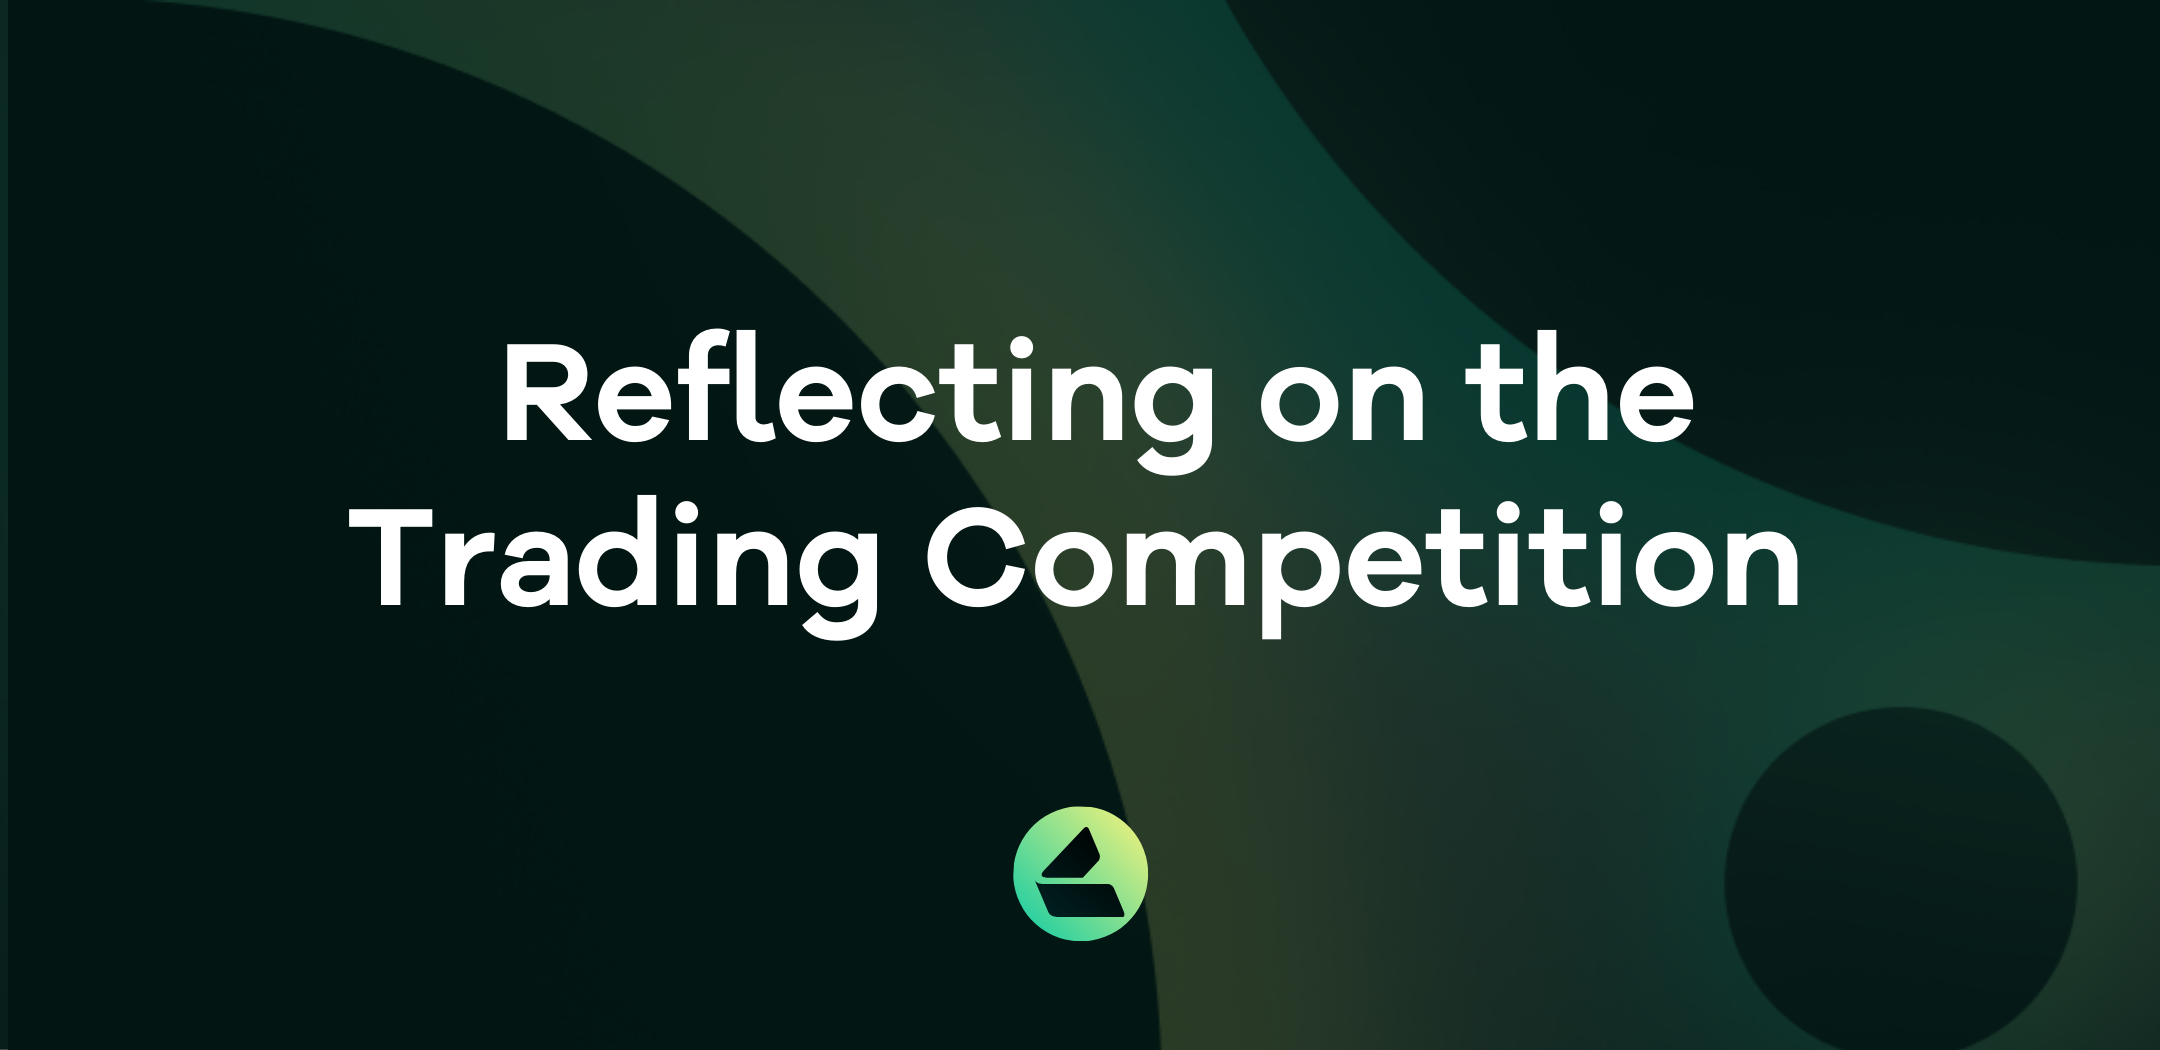 Reflecting on the Trading Competition